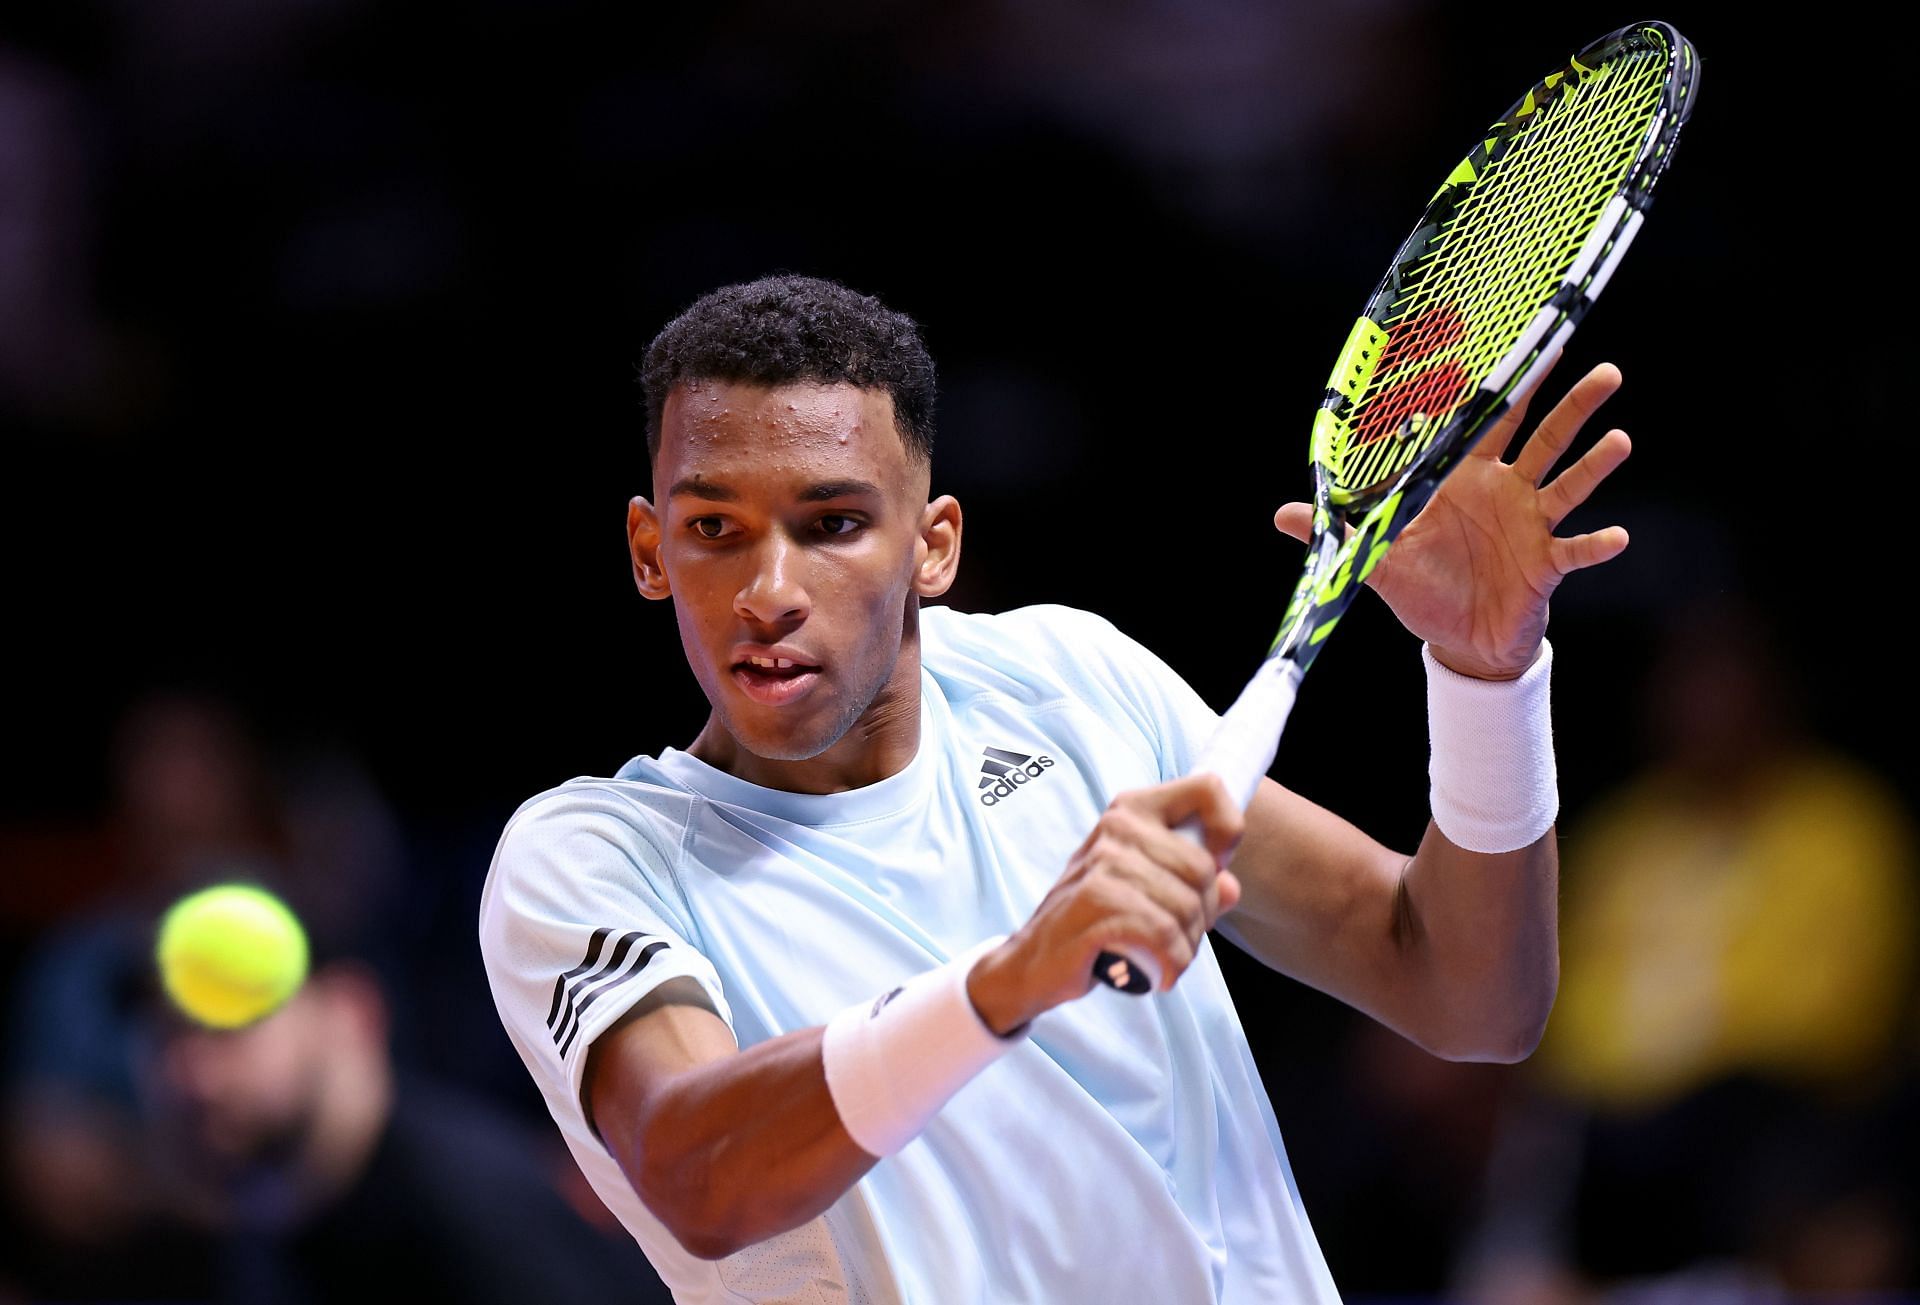 Novak Djokovic vs Felix Auger-Aliassime Where to watch, TV schedule, live streaming details and more World Tennis League 2022